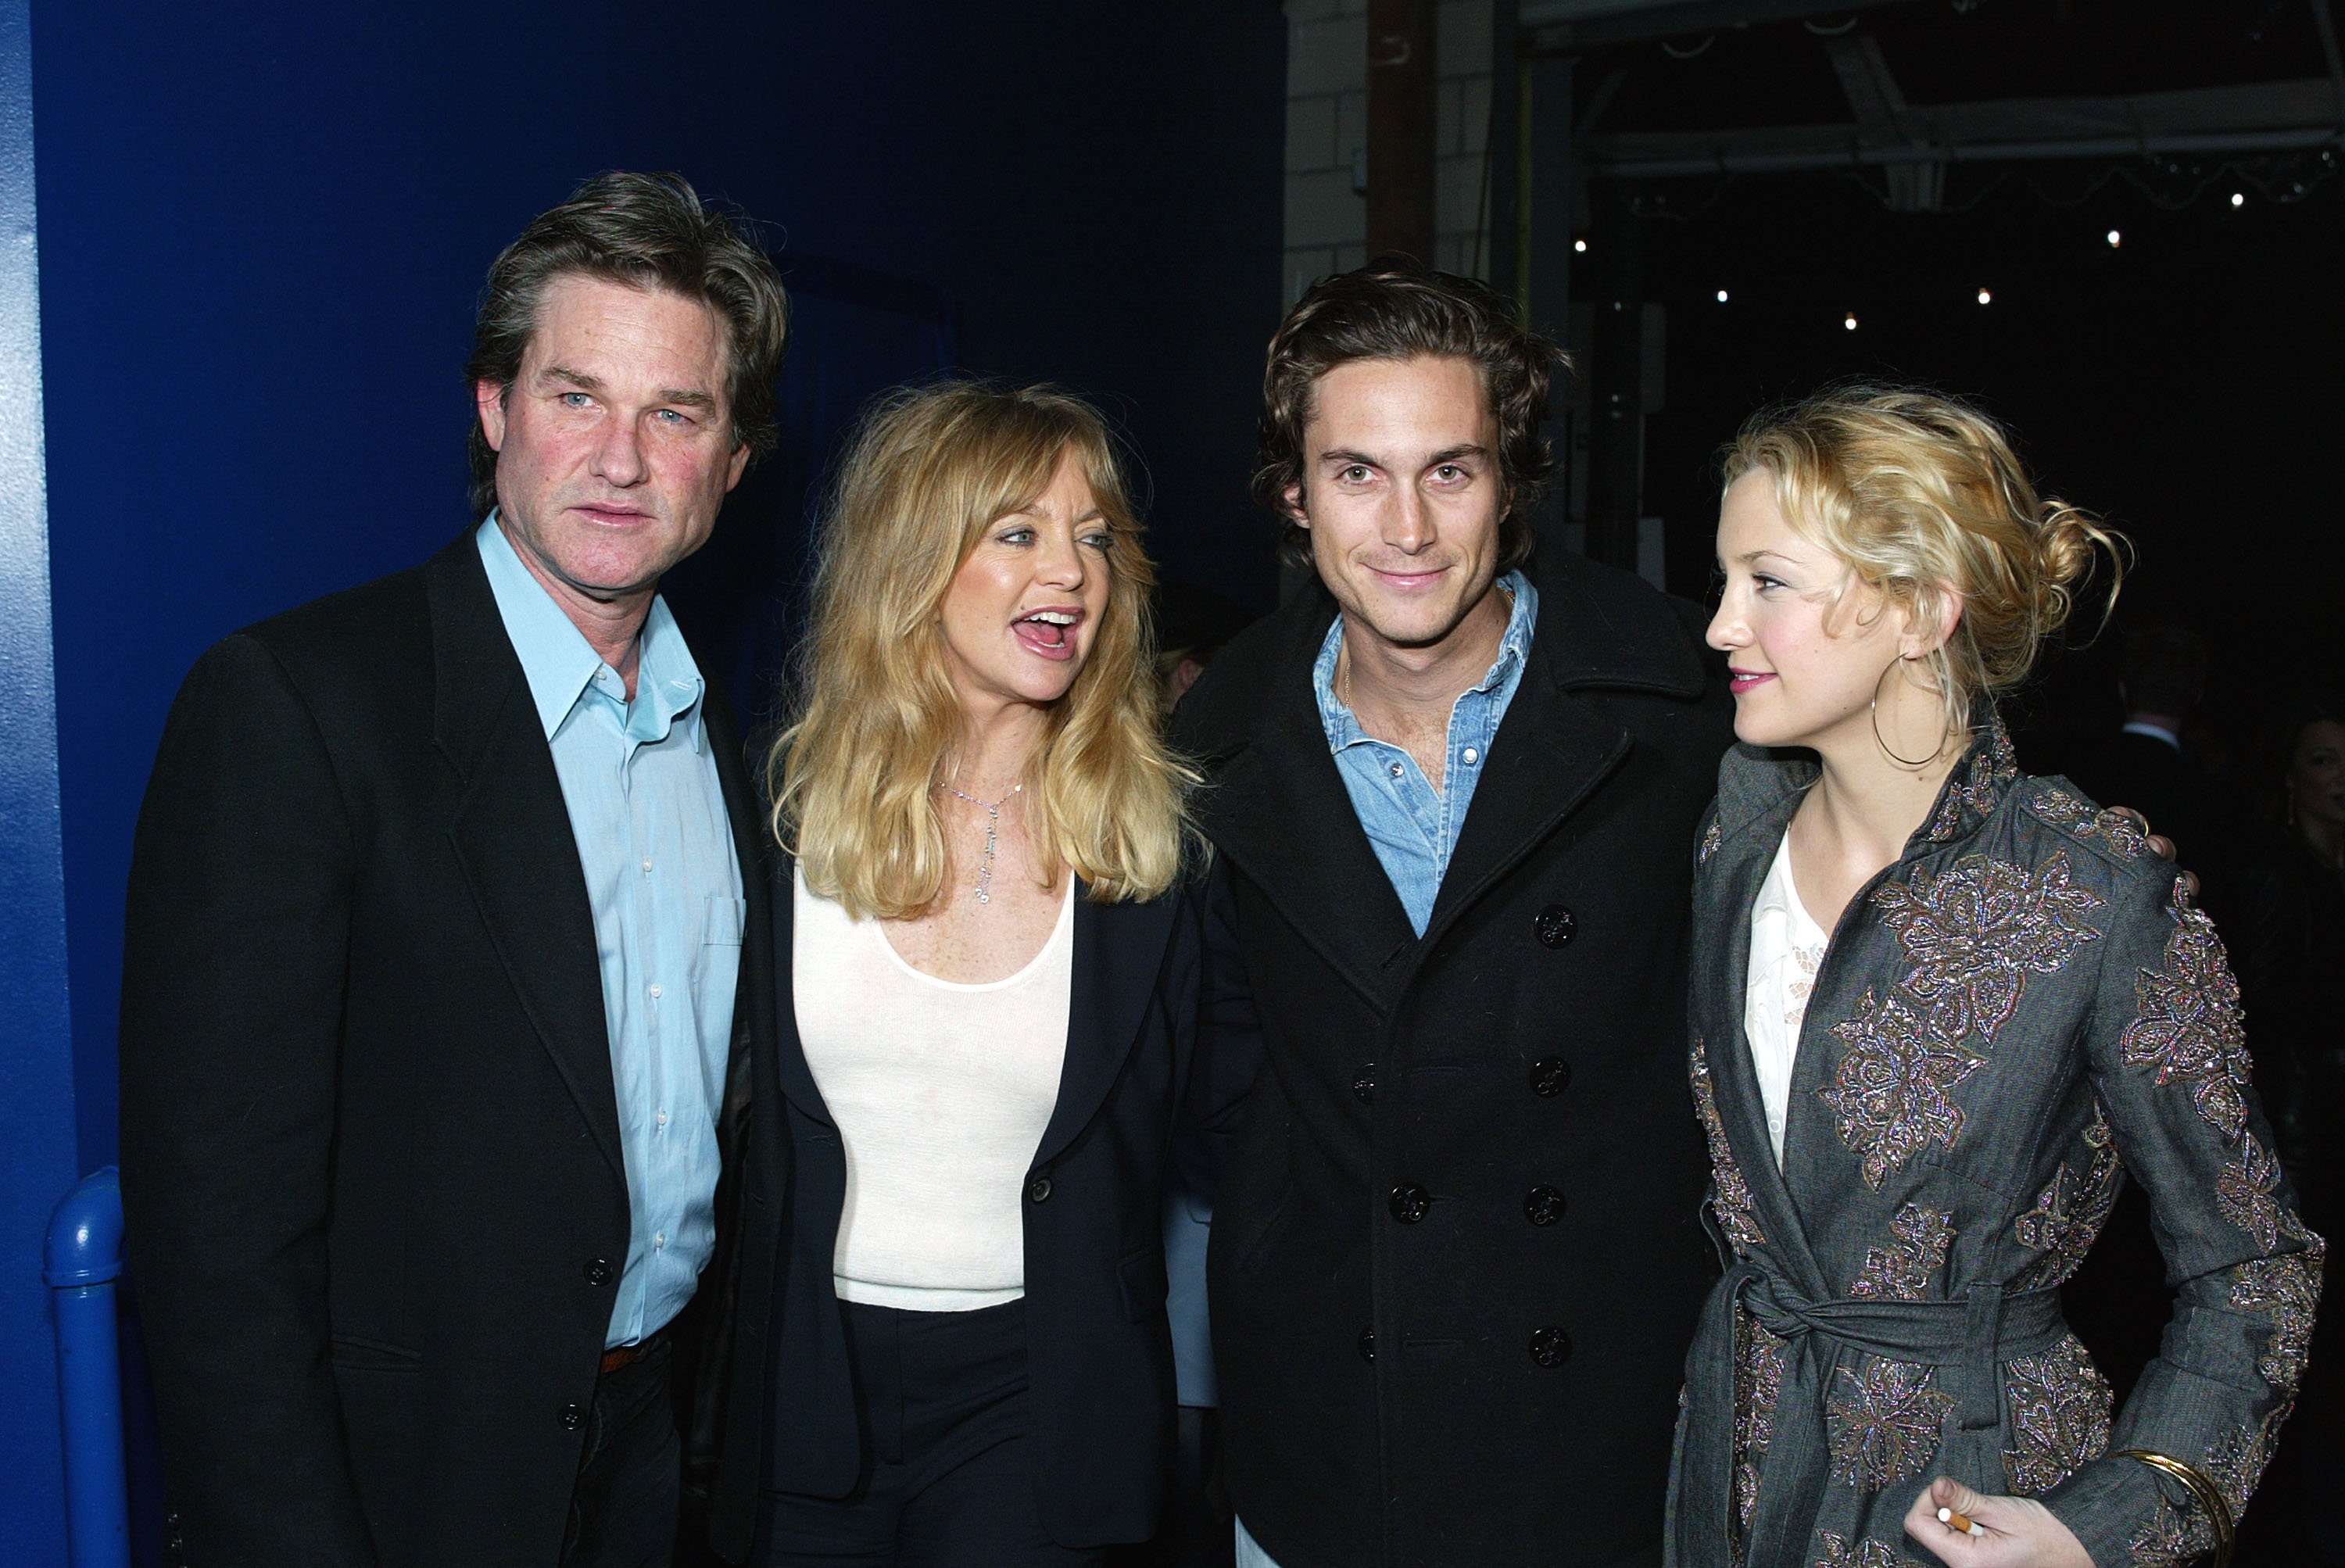 Kurt Russell, Goldie Hawn, Oliver Hudson and his sister Kate Hudson pose at the post-premiere party for "Dark Blue" on Febraury 12, 2003 | Source: Getty Images